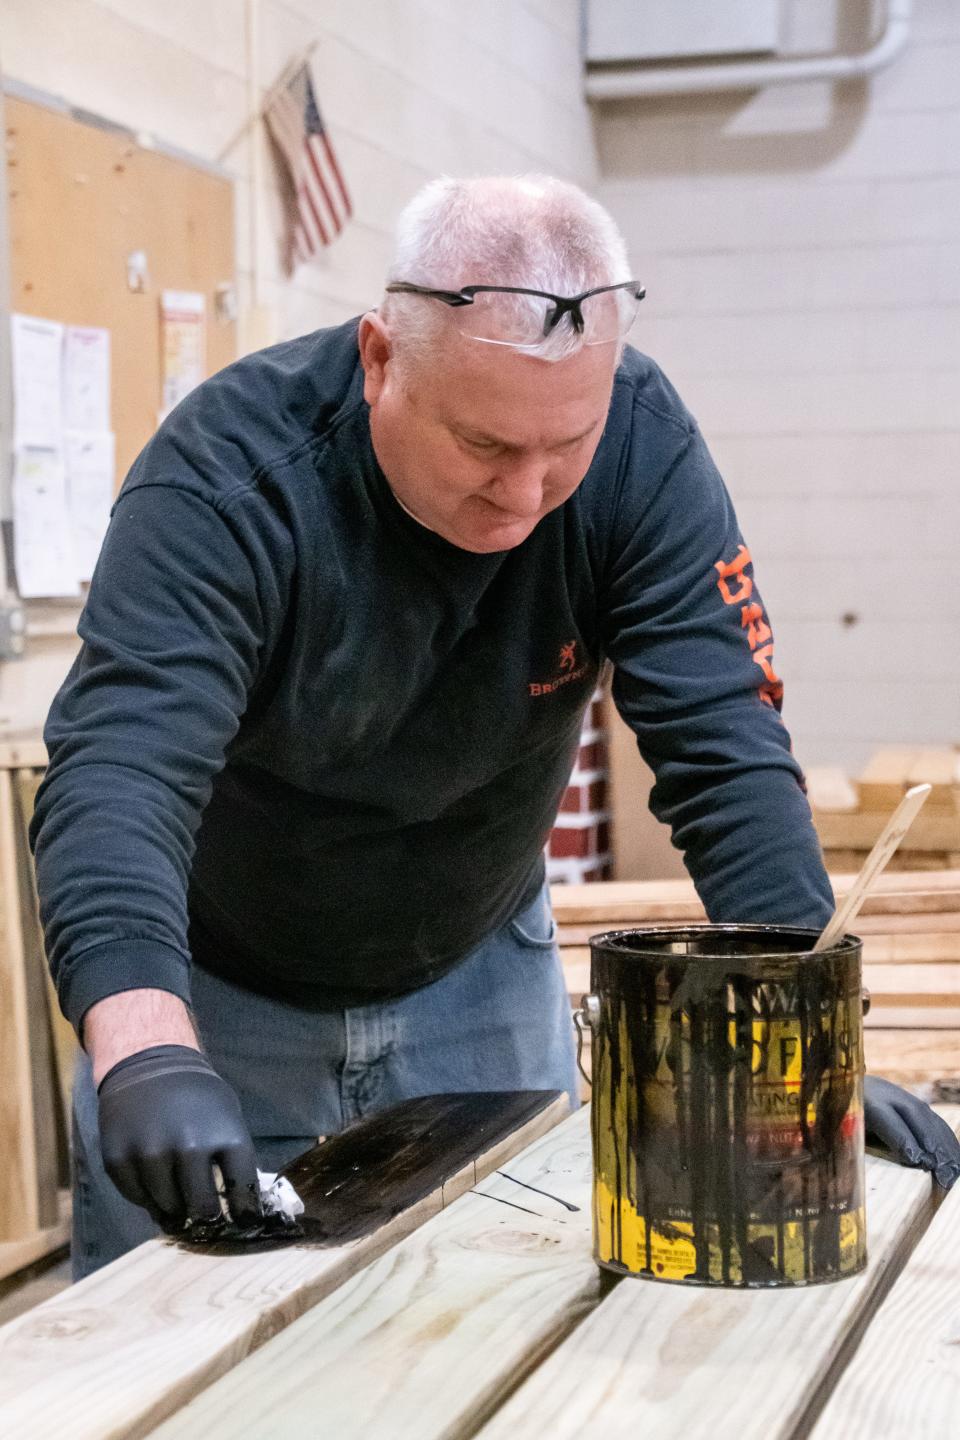 Bob Kruse stains a picnic table at Guernsey Industries. Kruse has been utilizing the organization's services for more than 30 years and has been hired on as a staff member.